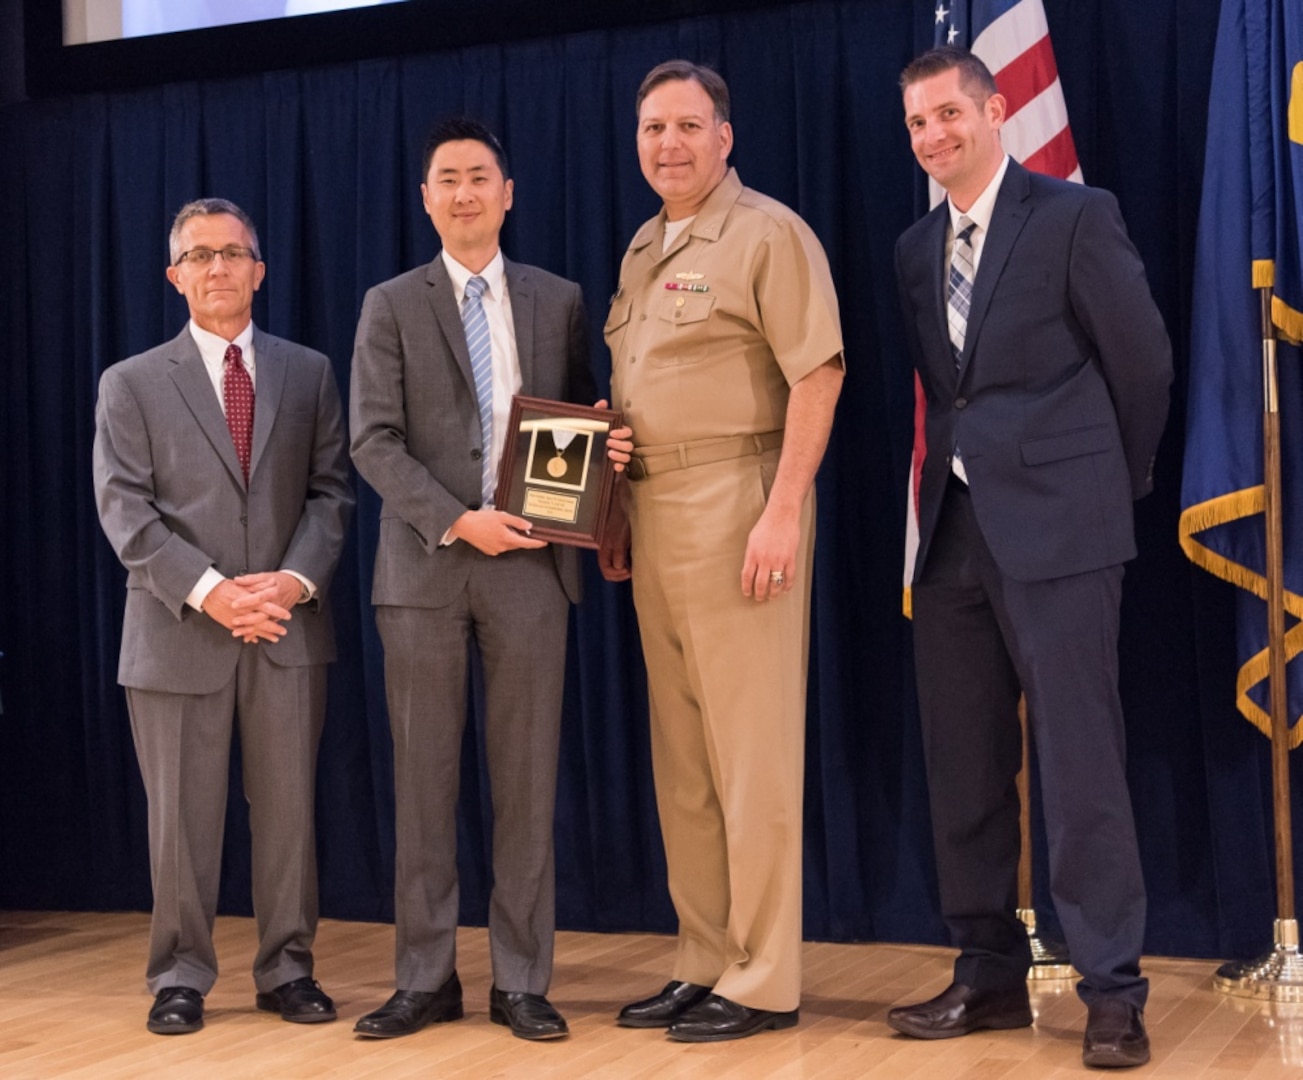 Ji Kim, deputy comptroller for Carderocks budget office, receives the Rear Adm. Grace M. Hopper Award for excellence in organizational support at the Naval Surface Warfare Center, Carderock Division Honor Awards ceremony Aug. 1, 2017, in West Bethesda, Md. From left to right: Technical Director Dr. Tim Arcano, Kim, Commanding Officer Capt. Mark Vandroff and Comptroller Eric Stone. (U.S. Navy photo by Jake Cirksena/Released)